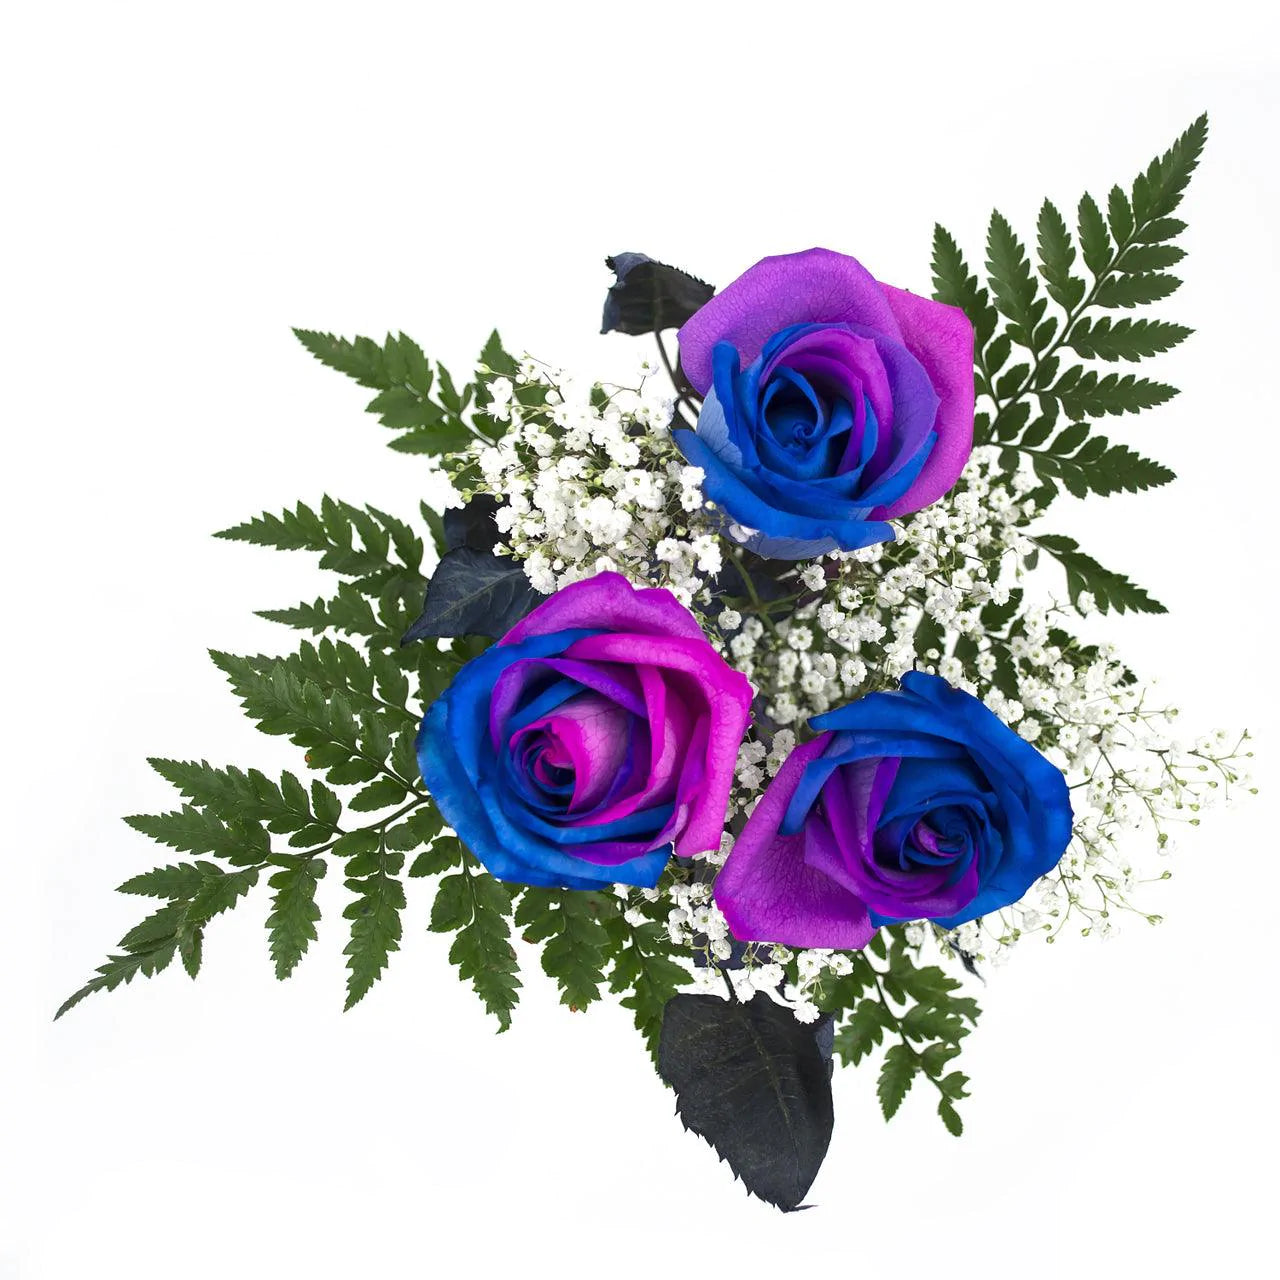 Pink and Blue 3-stem rose bouquets - 16